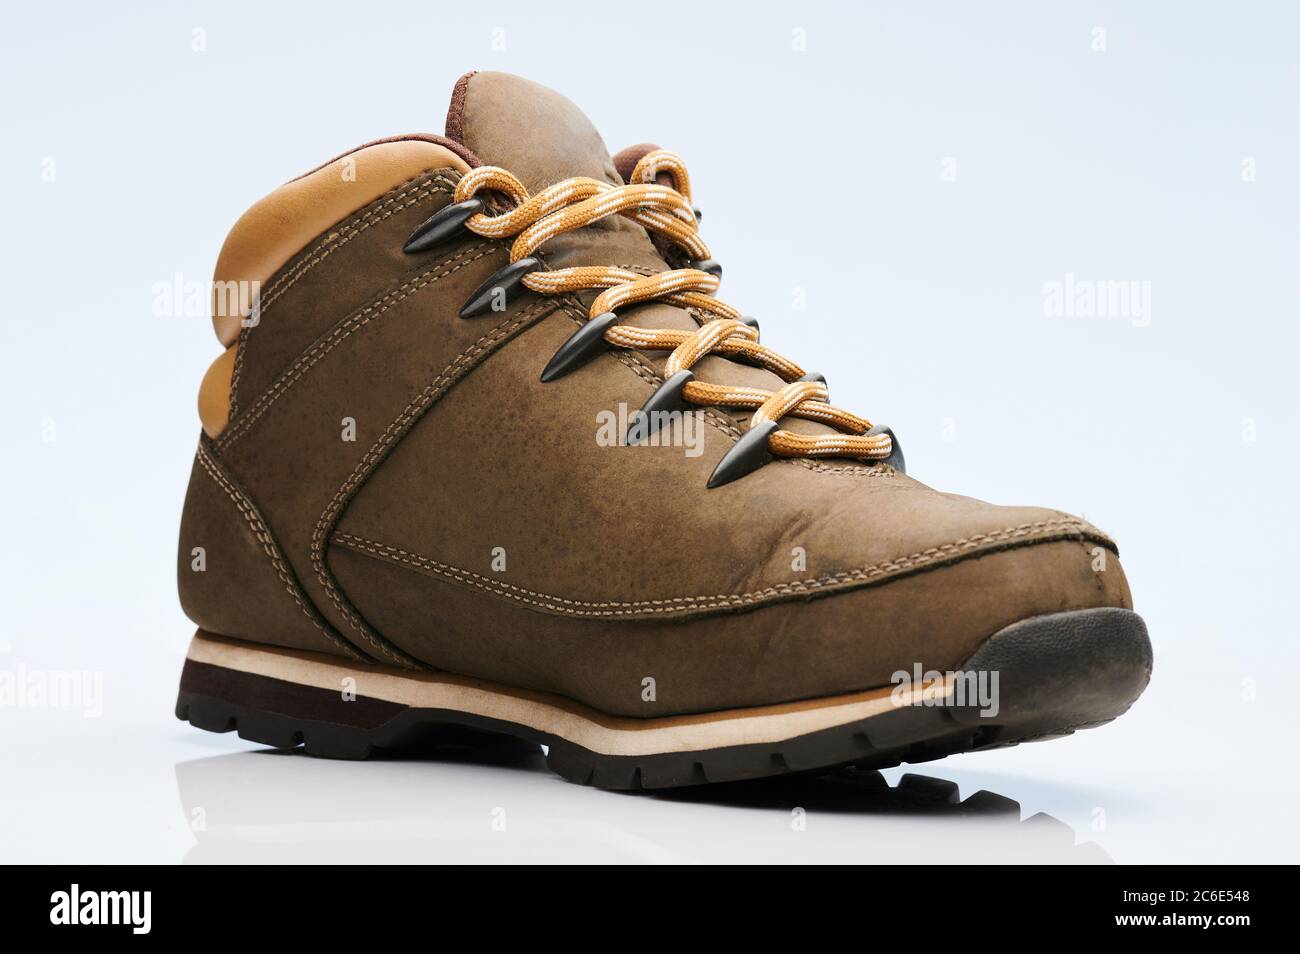 Brown leather hiking shoe isolated on white background Stock Photo